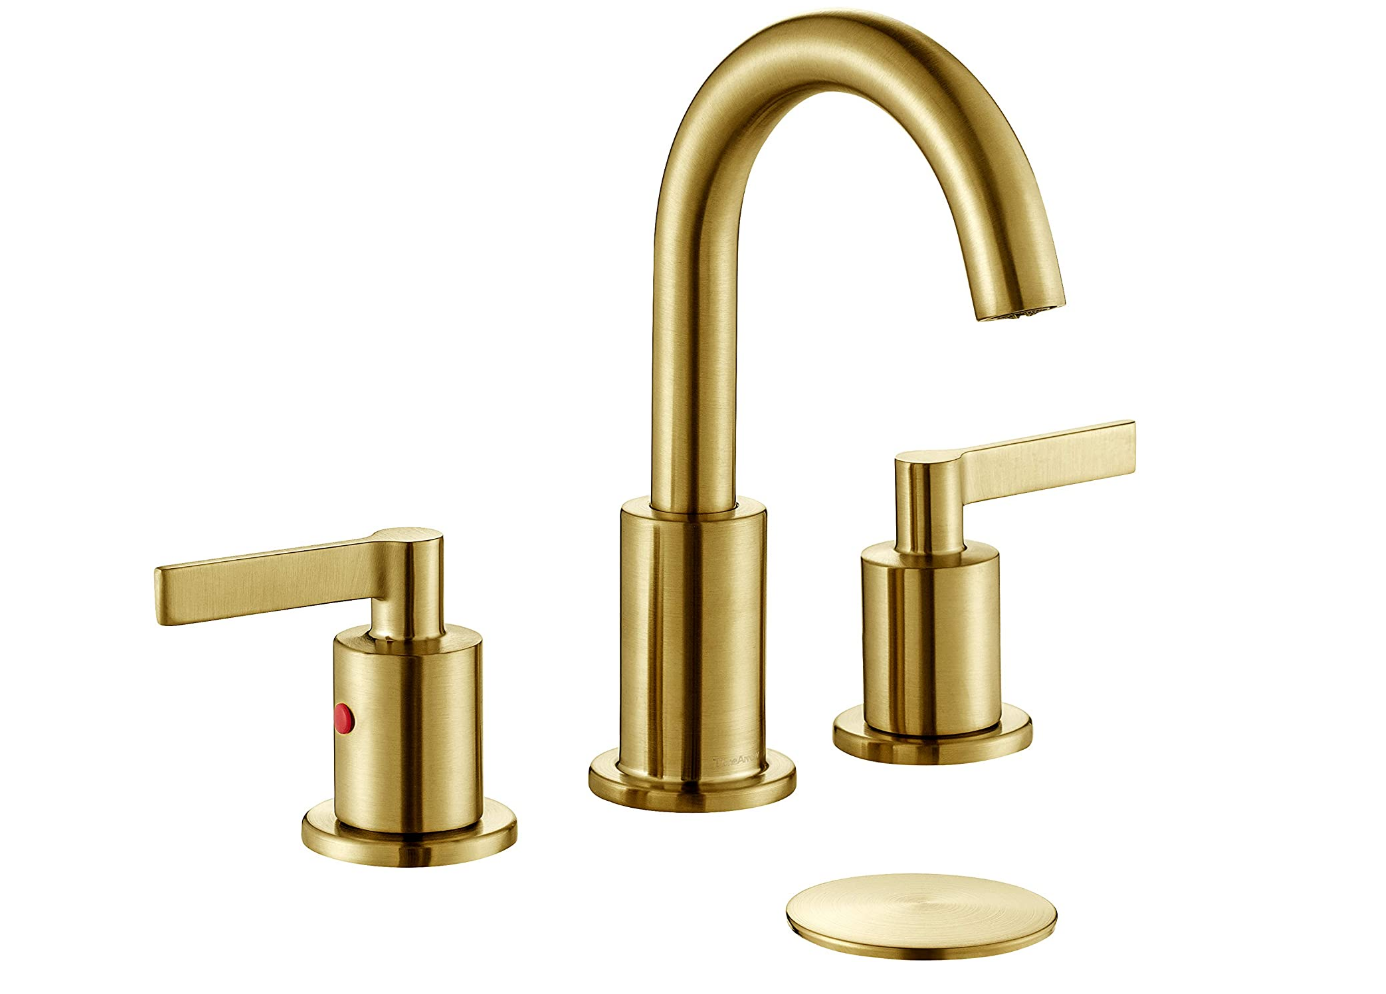 TimeArrow Widespread Two Handle Brass Bathroom Faucet Review